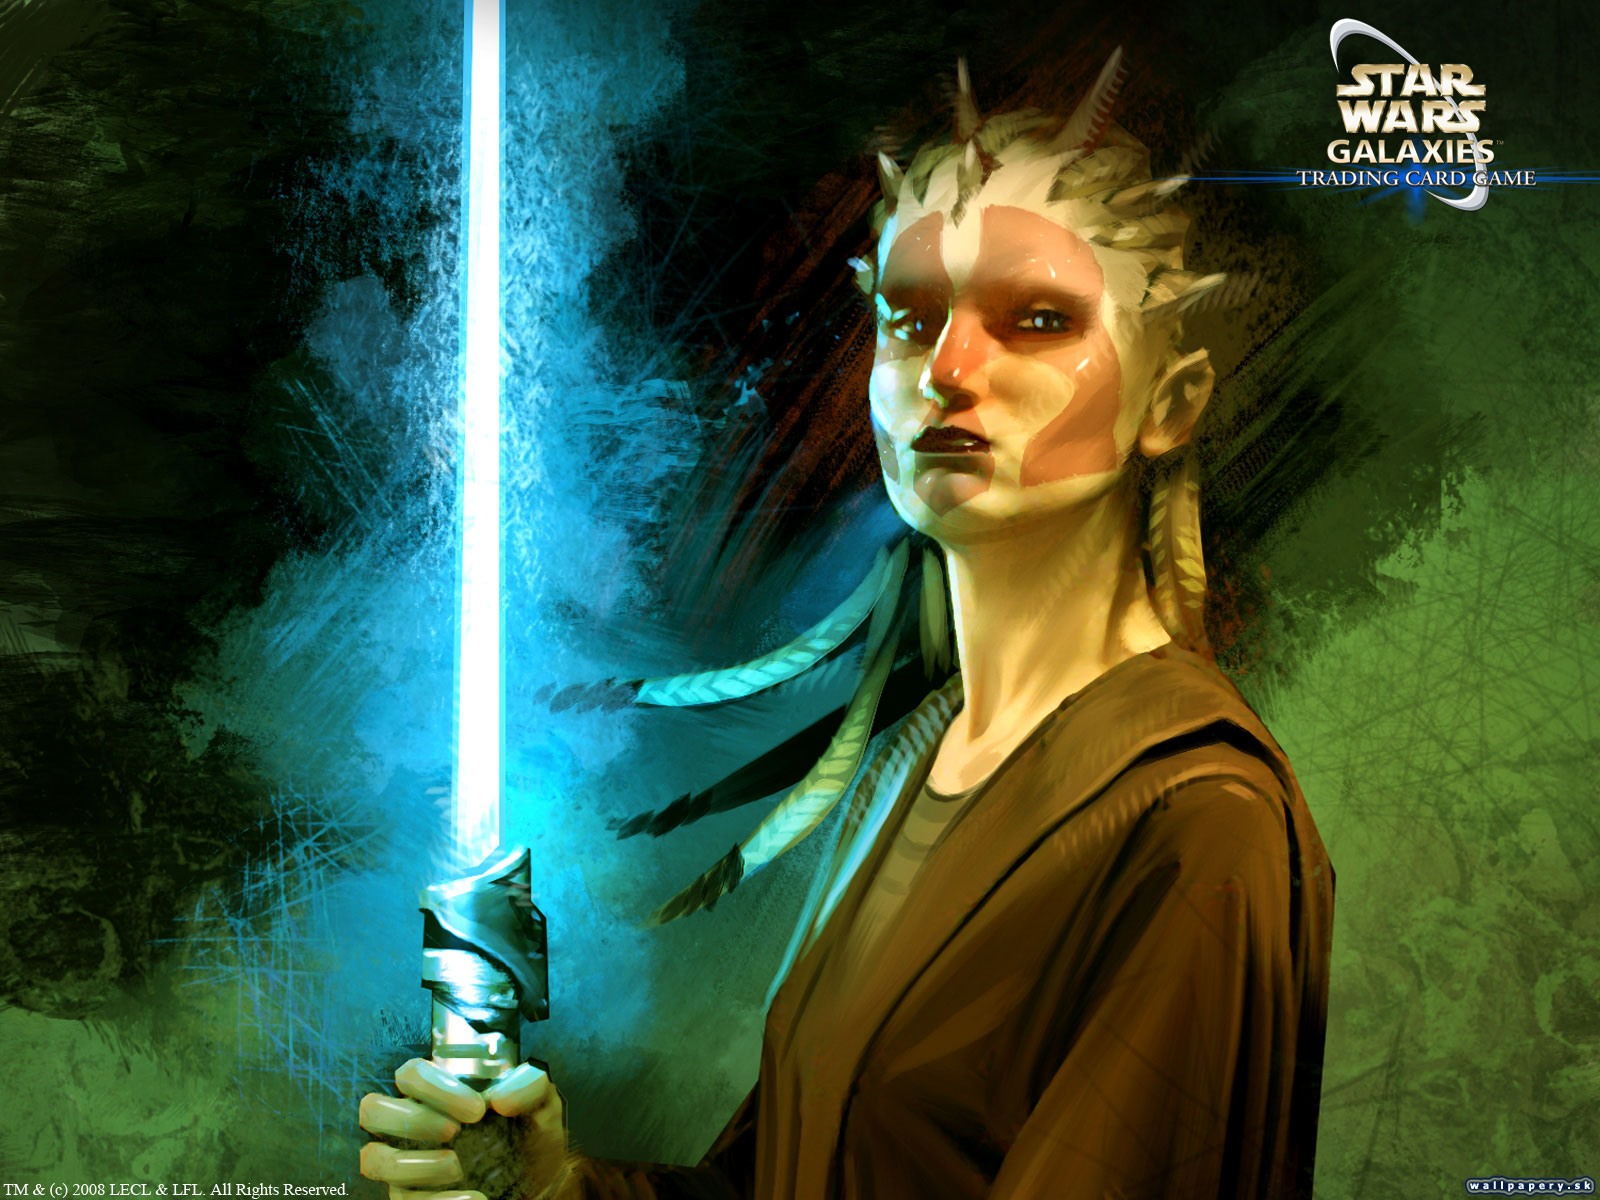 Star Wars Galaxies - Trading Card Game: Champions of the Force - wallpaper 19